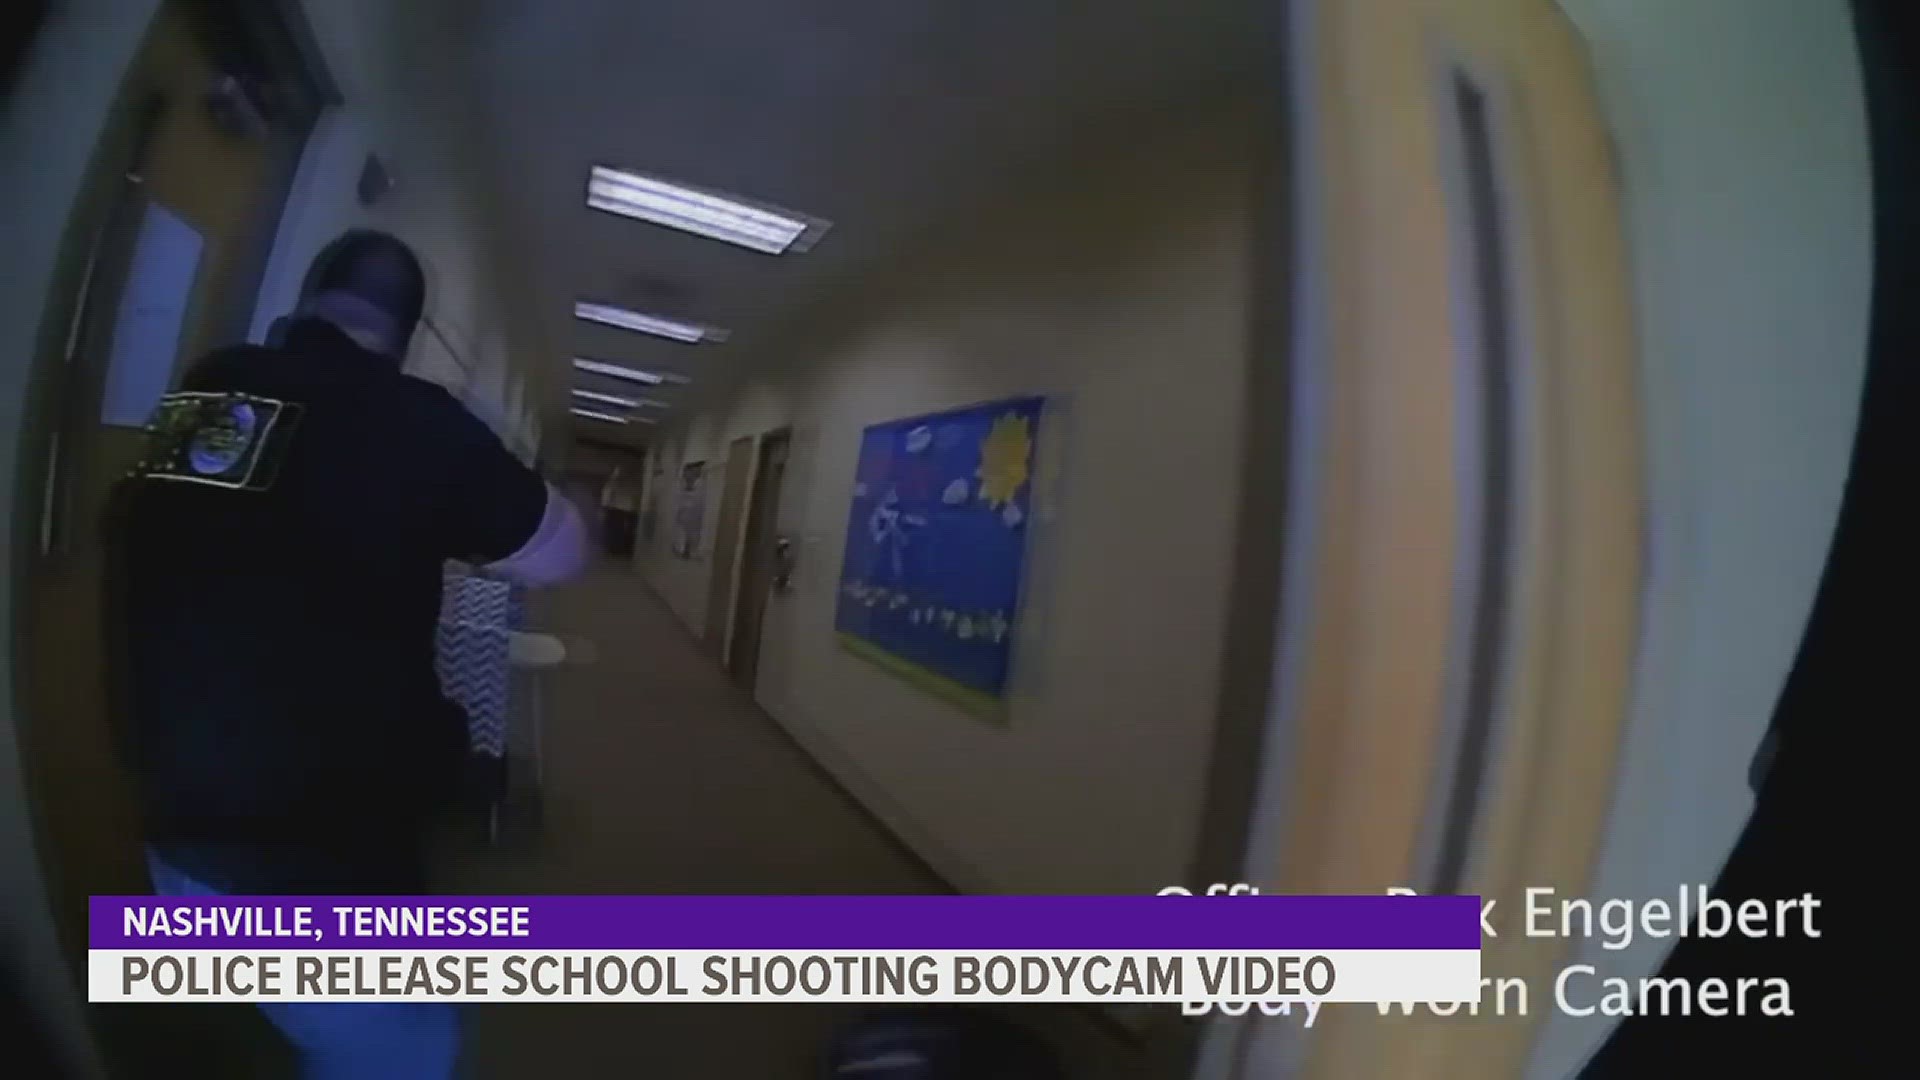 The body camera video is extremely graphic and shows officers confronting the shooter inside a Nashville elementary school.